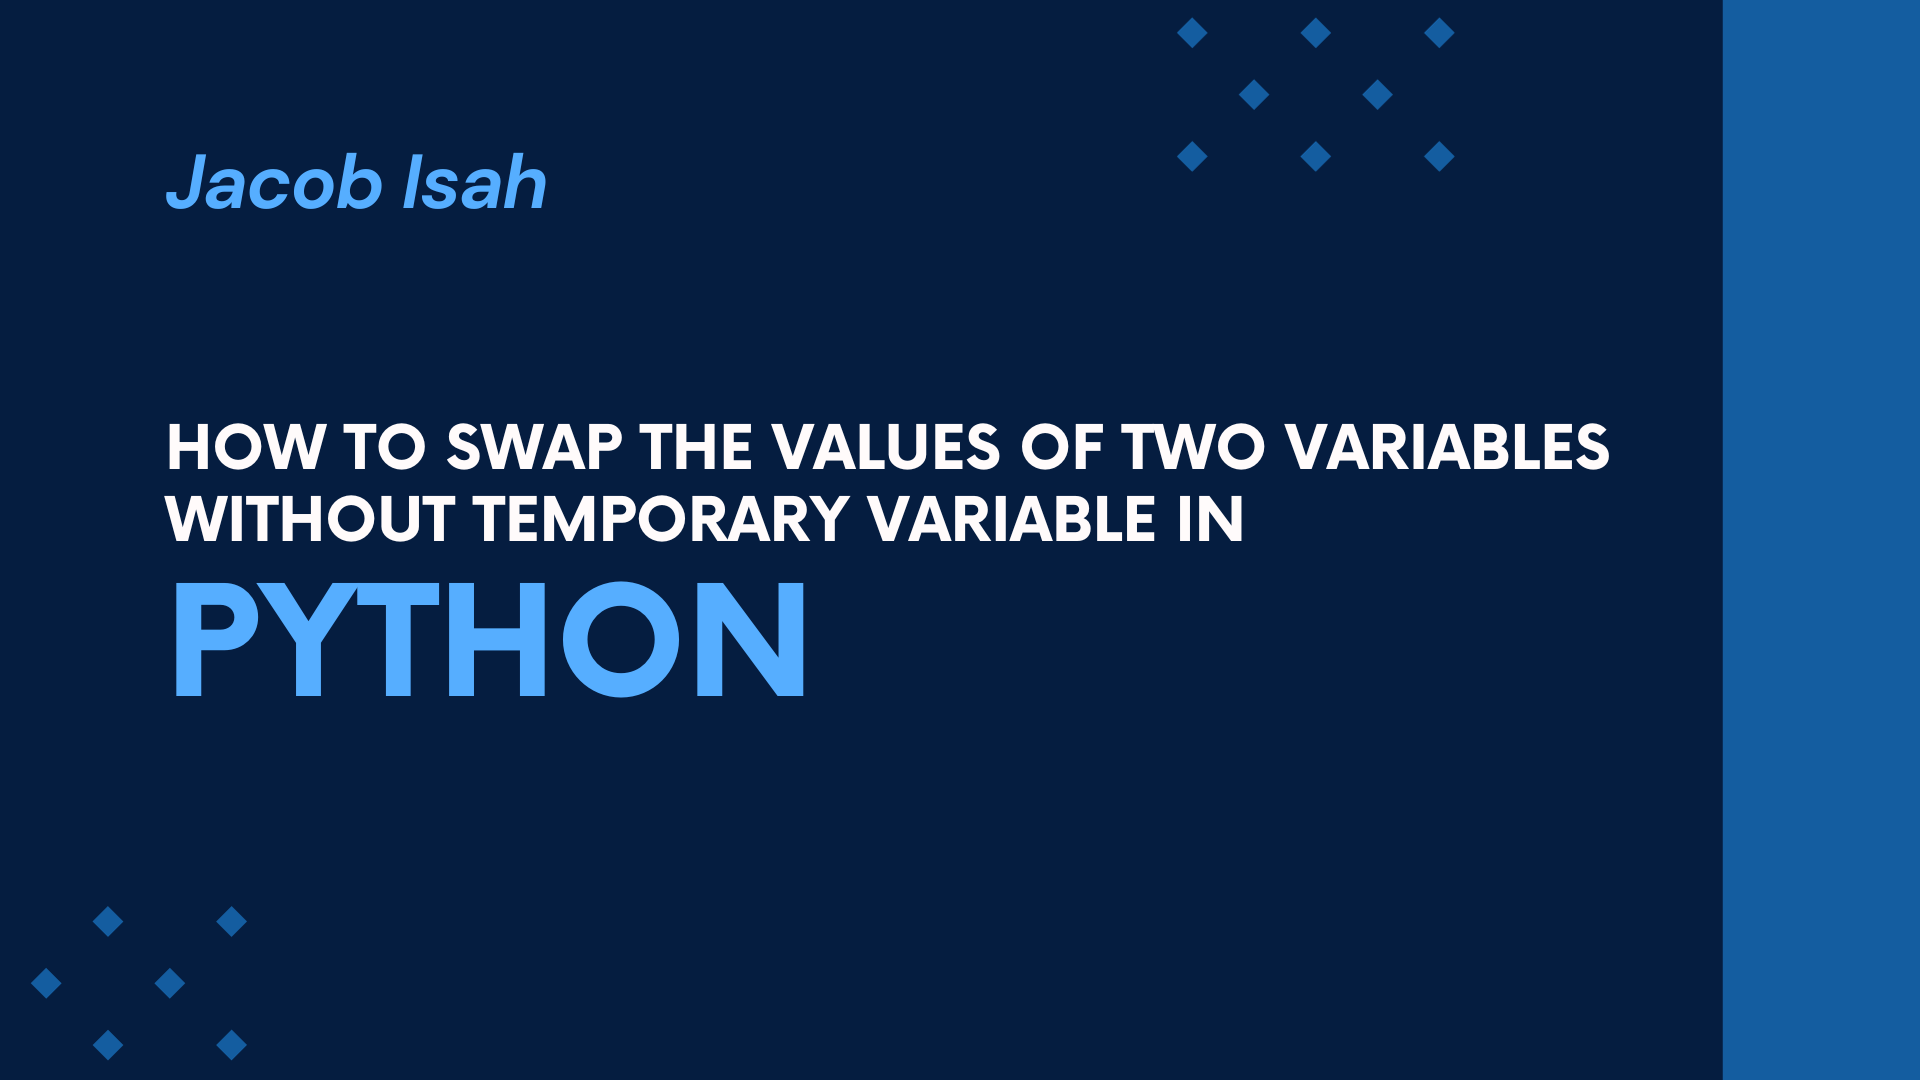 How to Swap the Values of Two Variables Without a Temporary Variable in Python